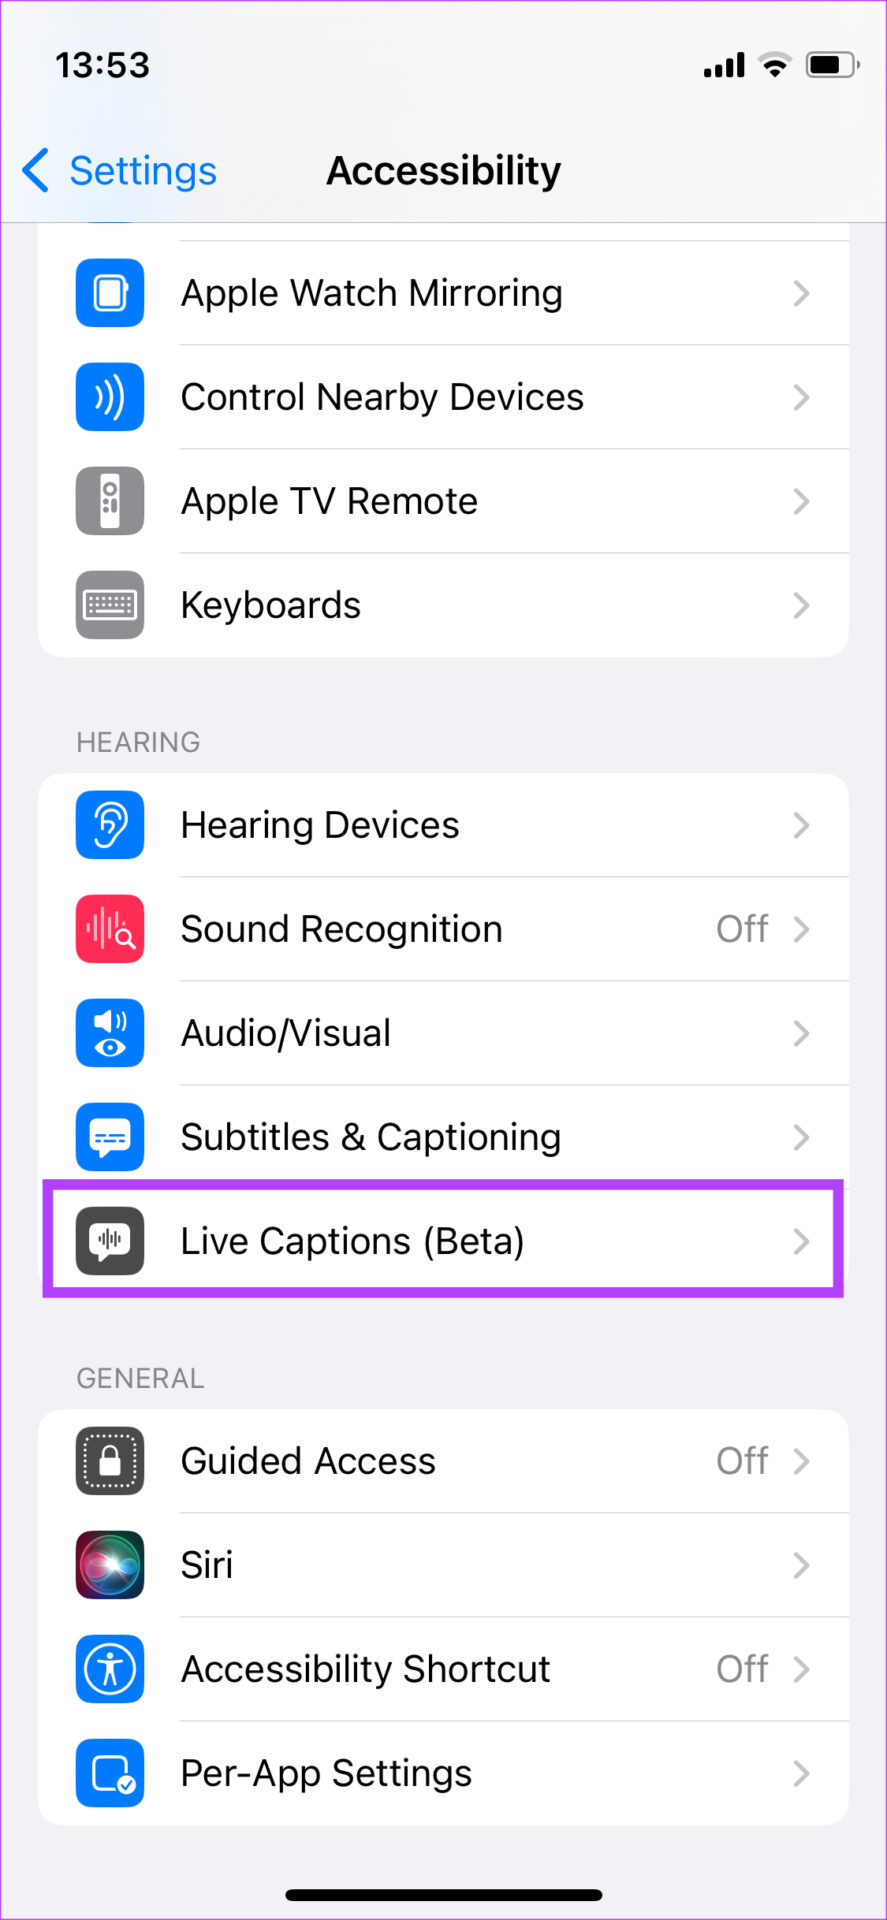 Go to live captions settings on iPhone